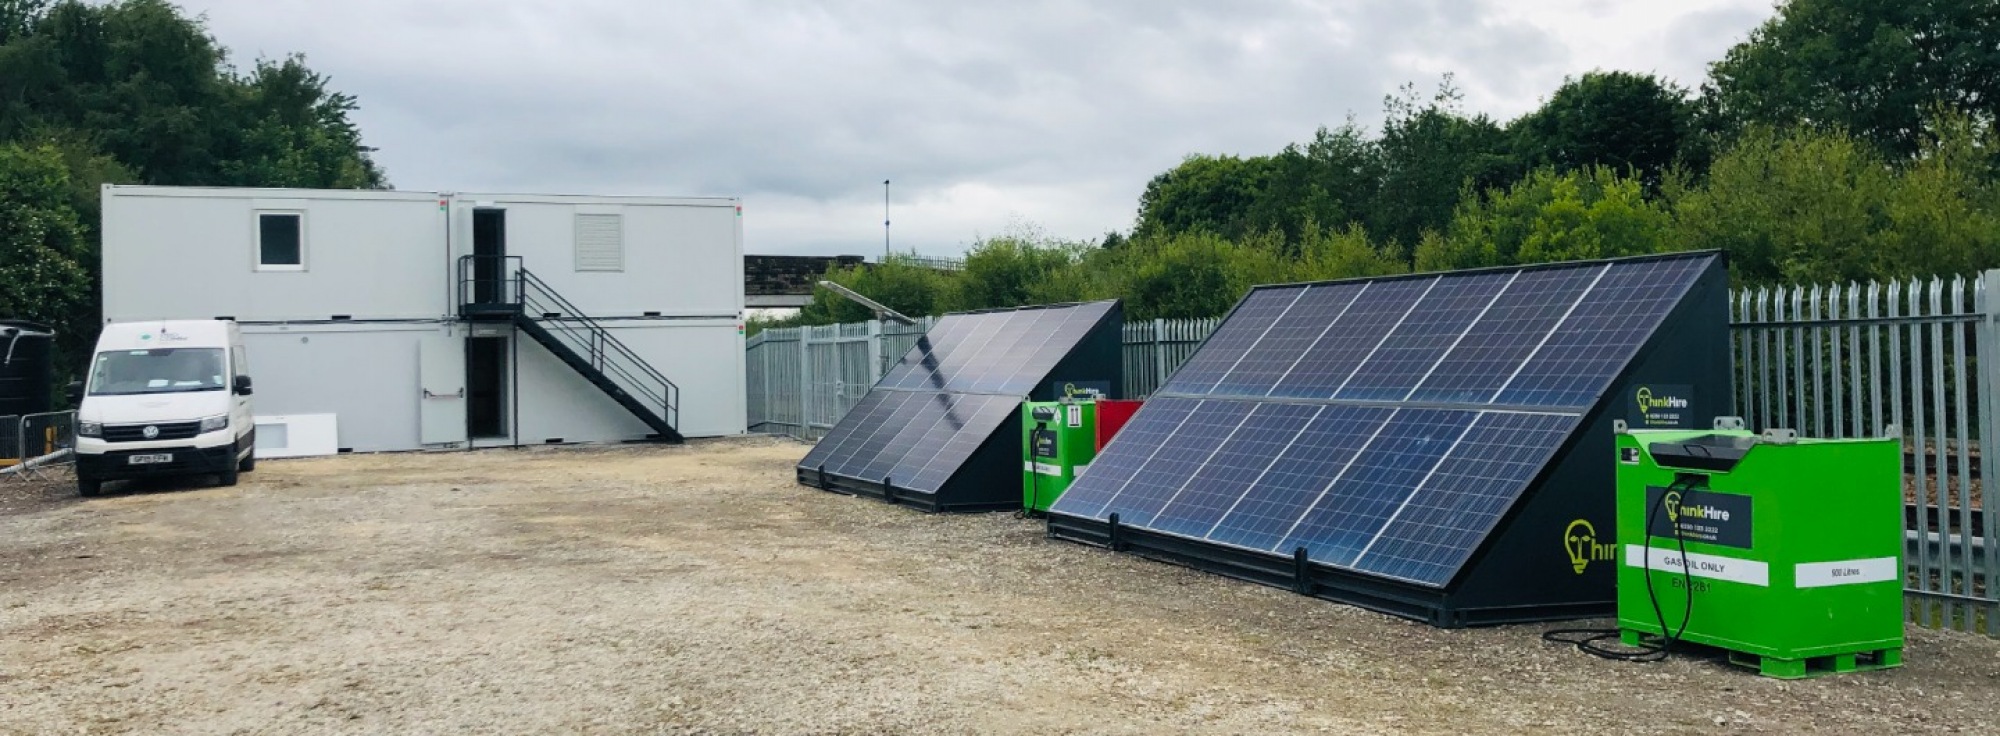 Latest solar hybrid generator launched on to rail project